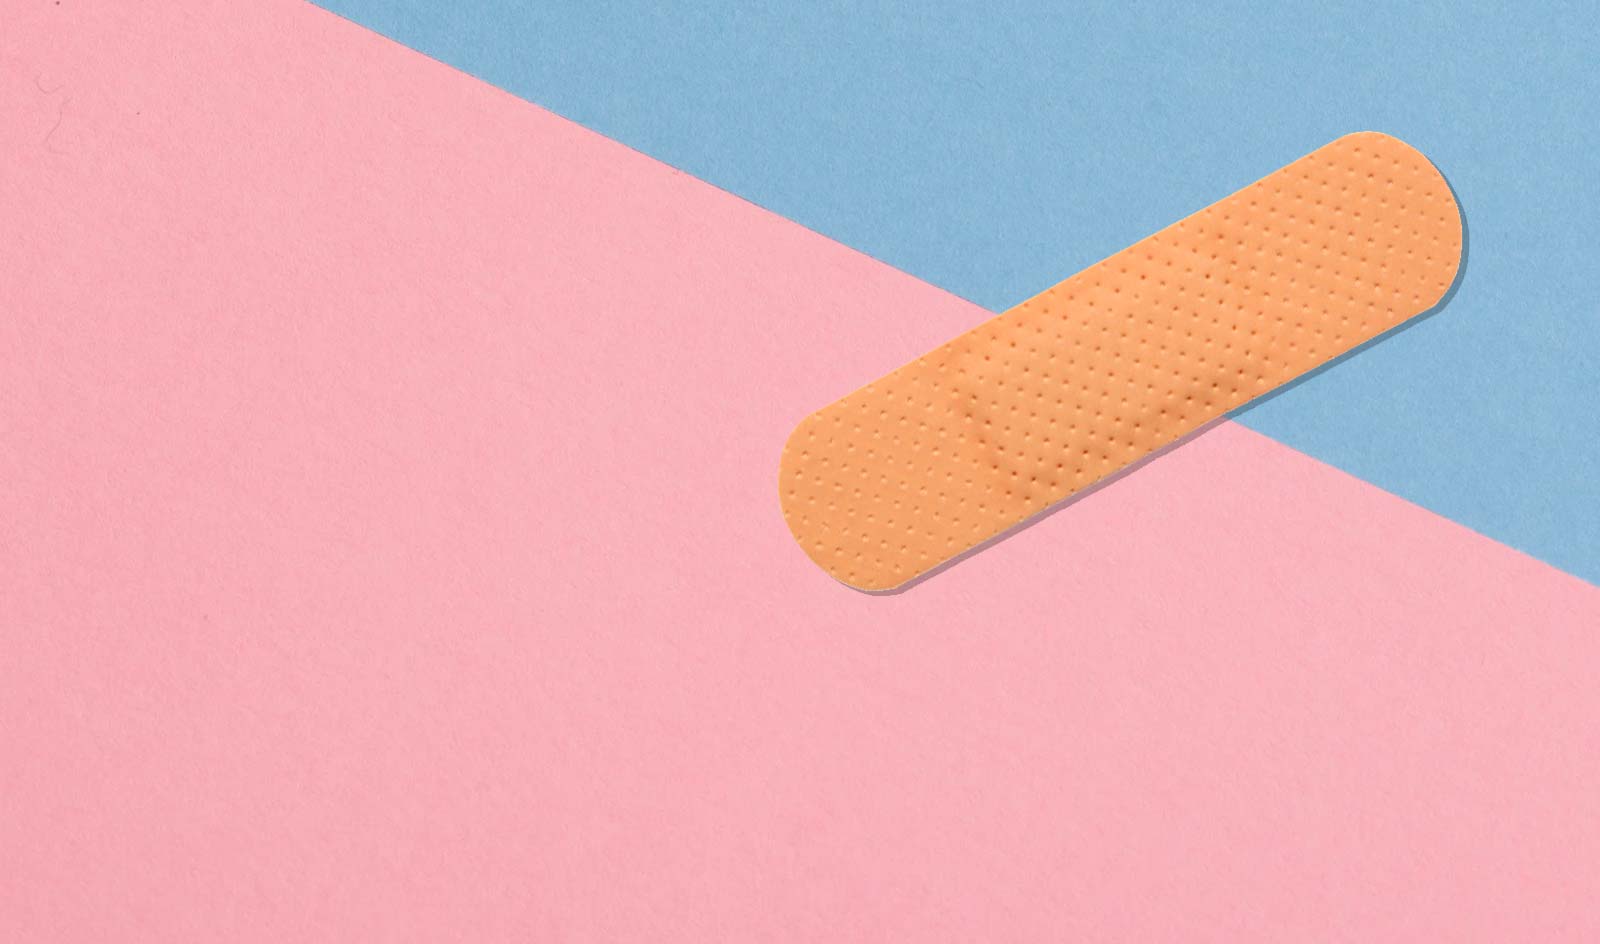 Bandaid on pink and blue background